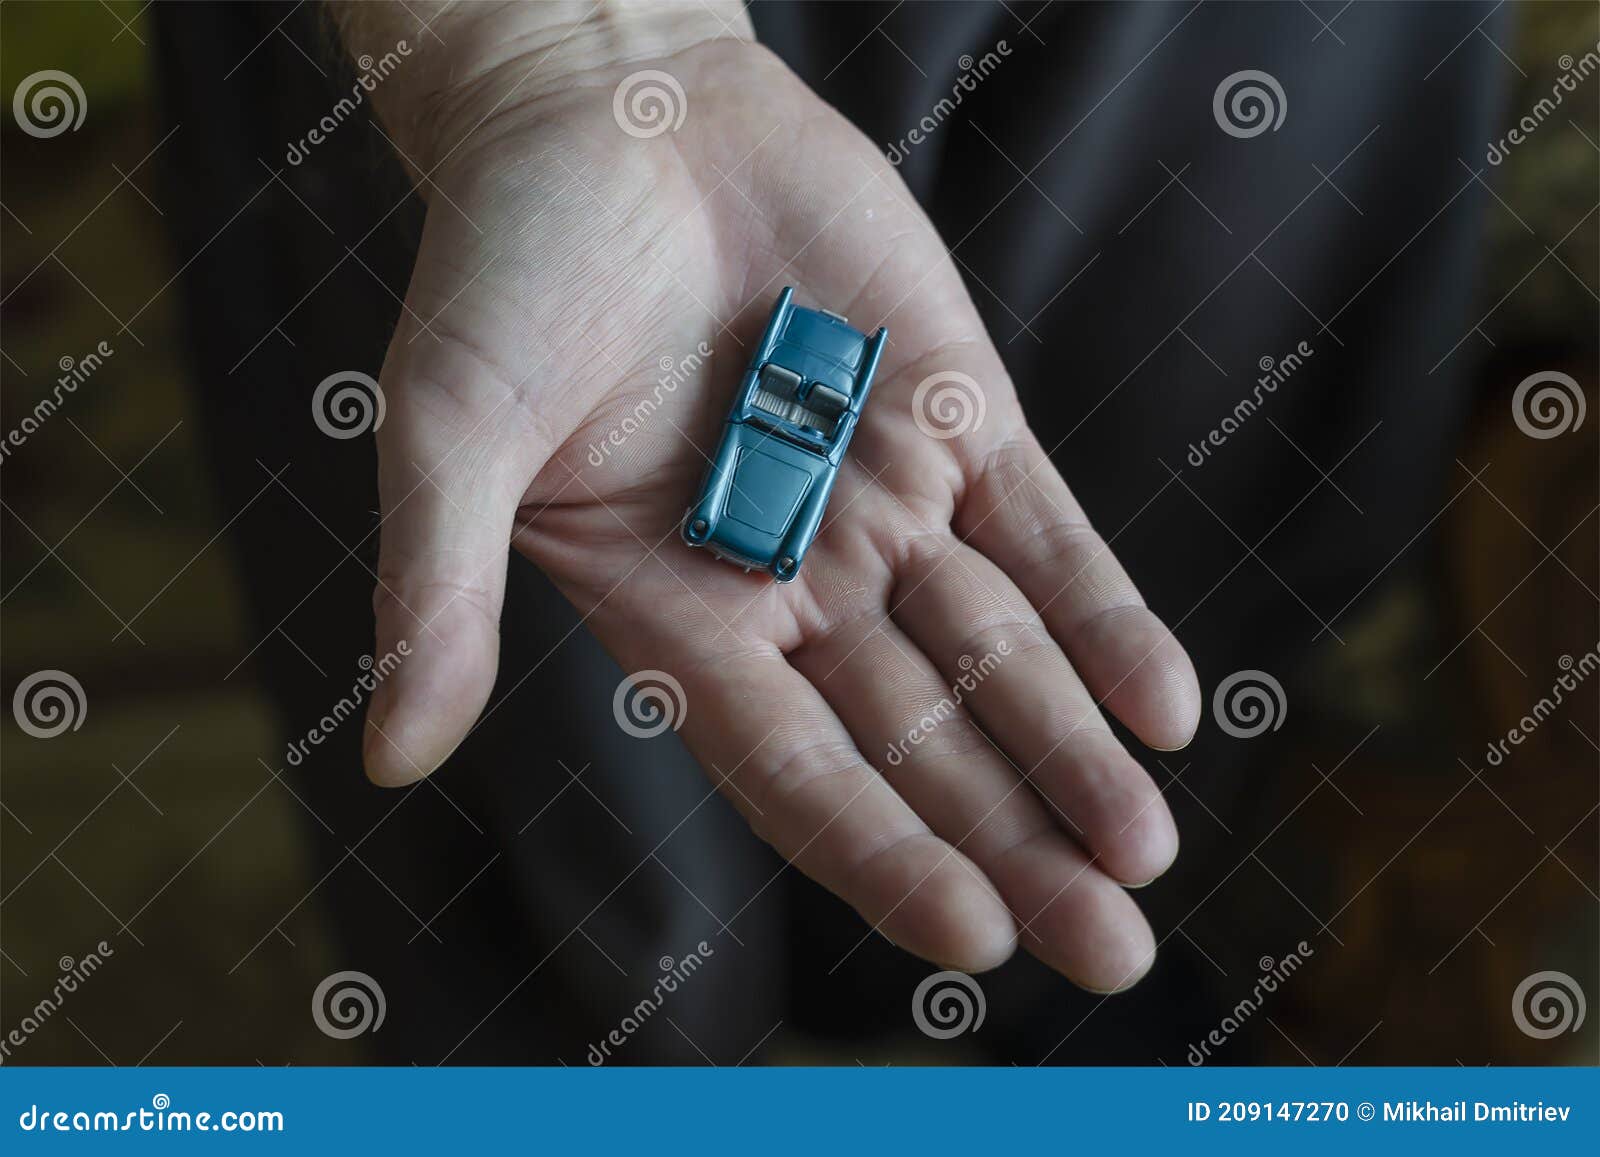 Auto Insurance Car Service Concept A Toy Car Lies In The Open Palm Of A Man S Hand Stock Photo Image Of Guarantee Finance 209147270